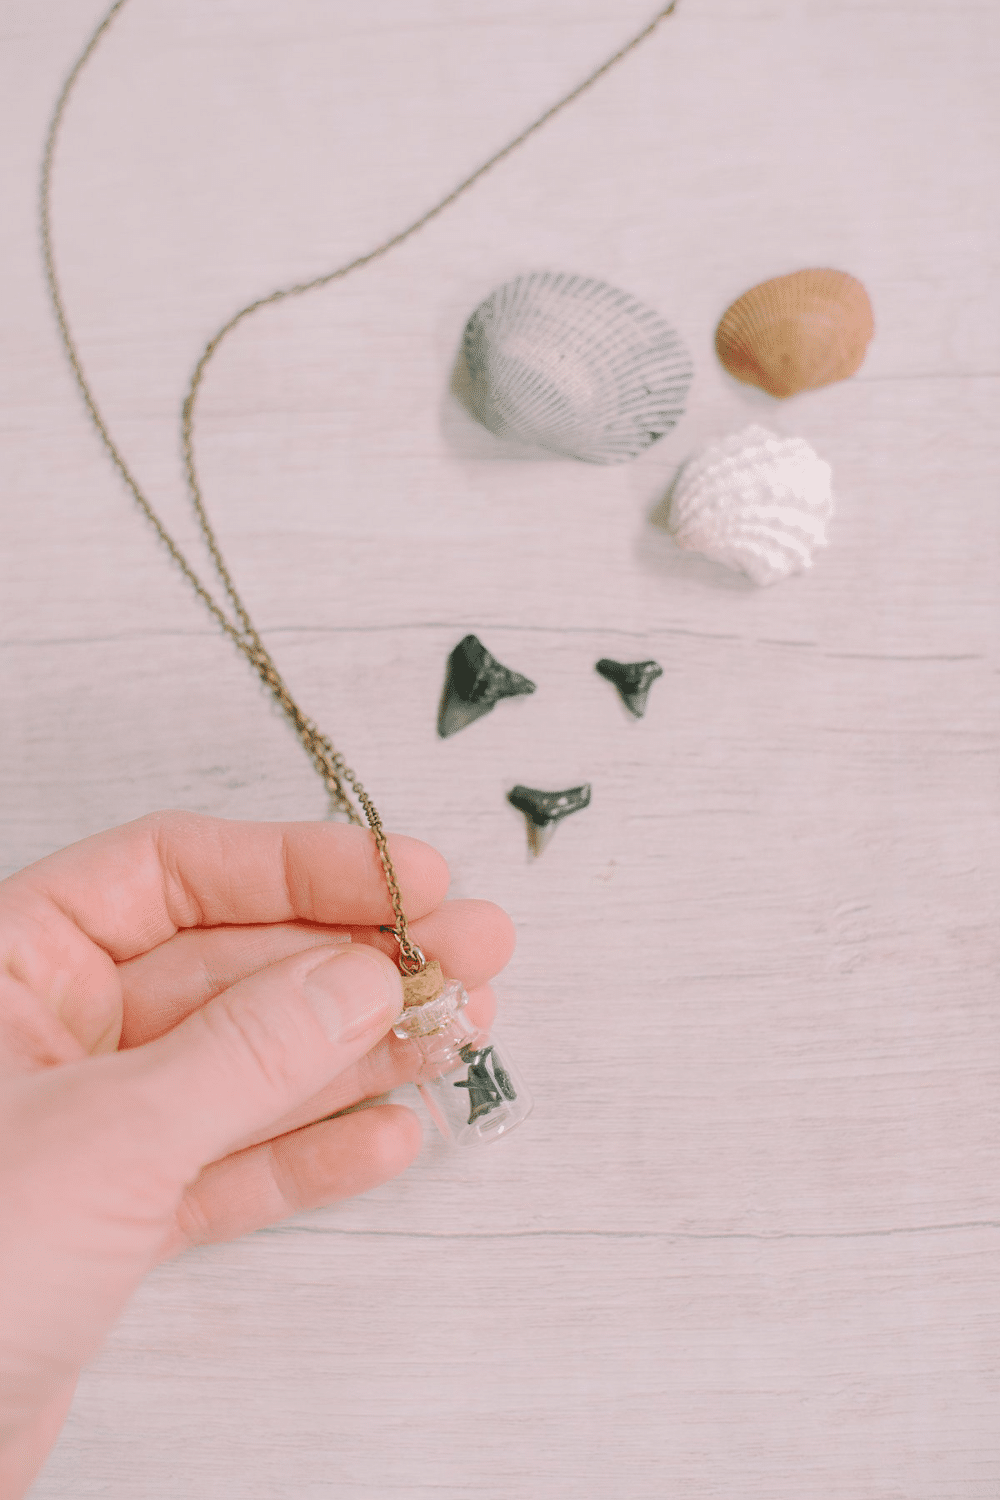 How to Make a Mini Glass Bottle Necklace